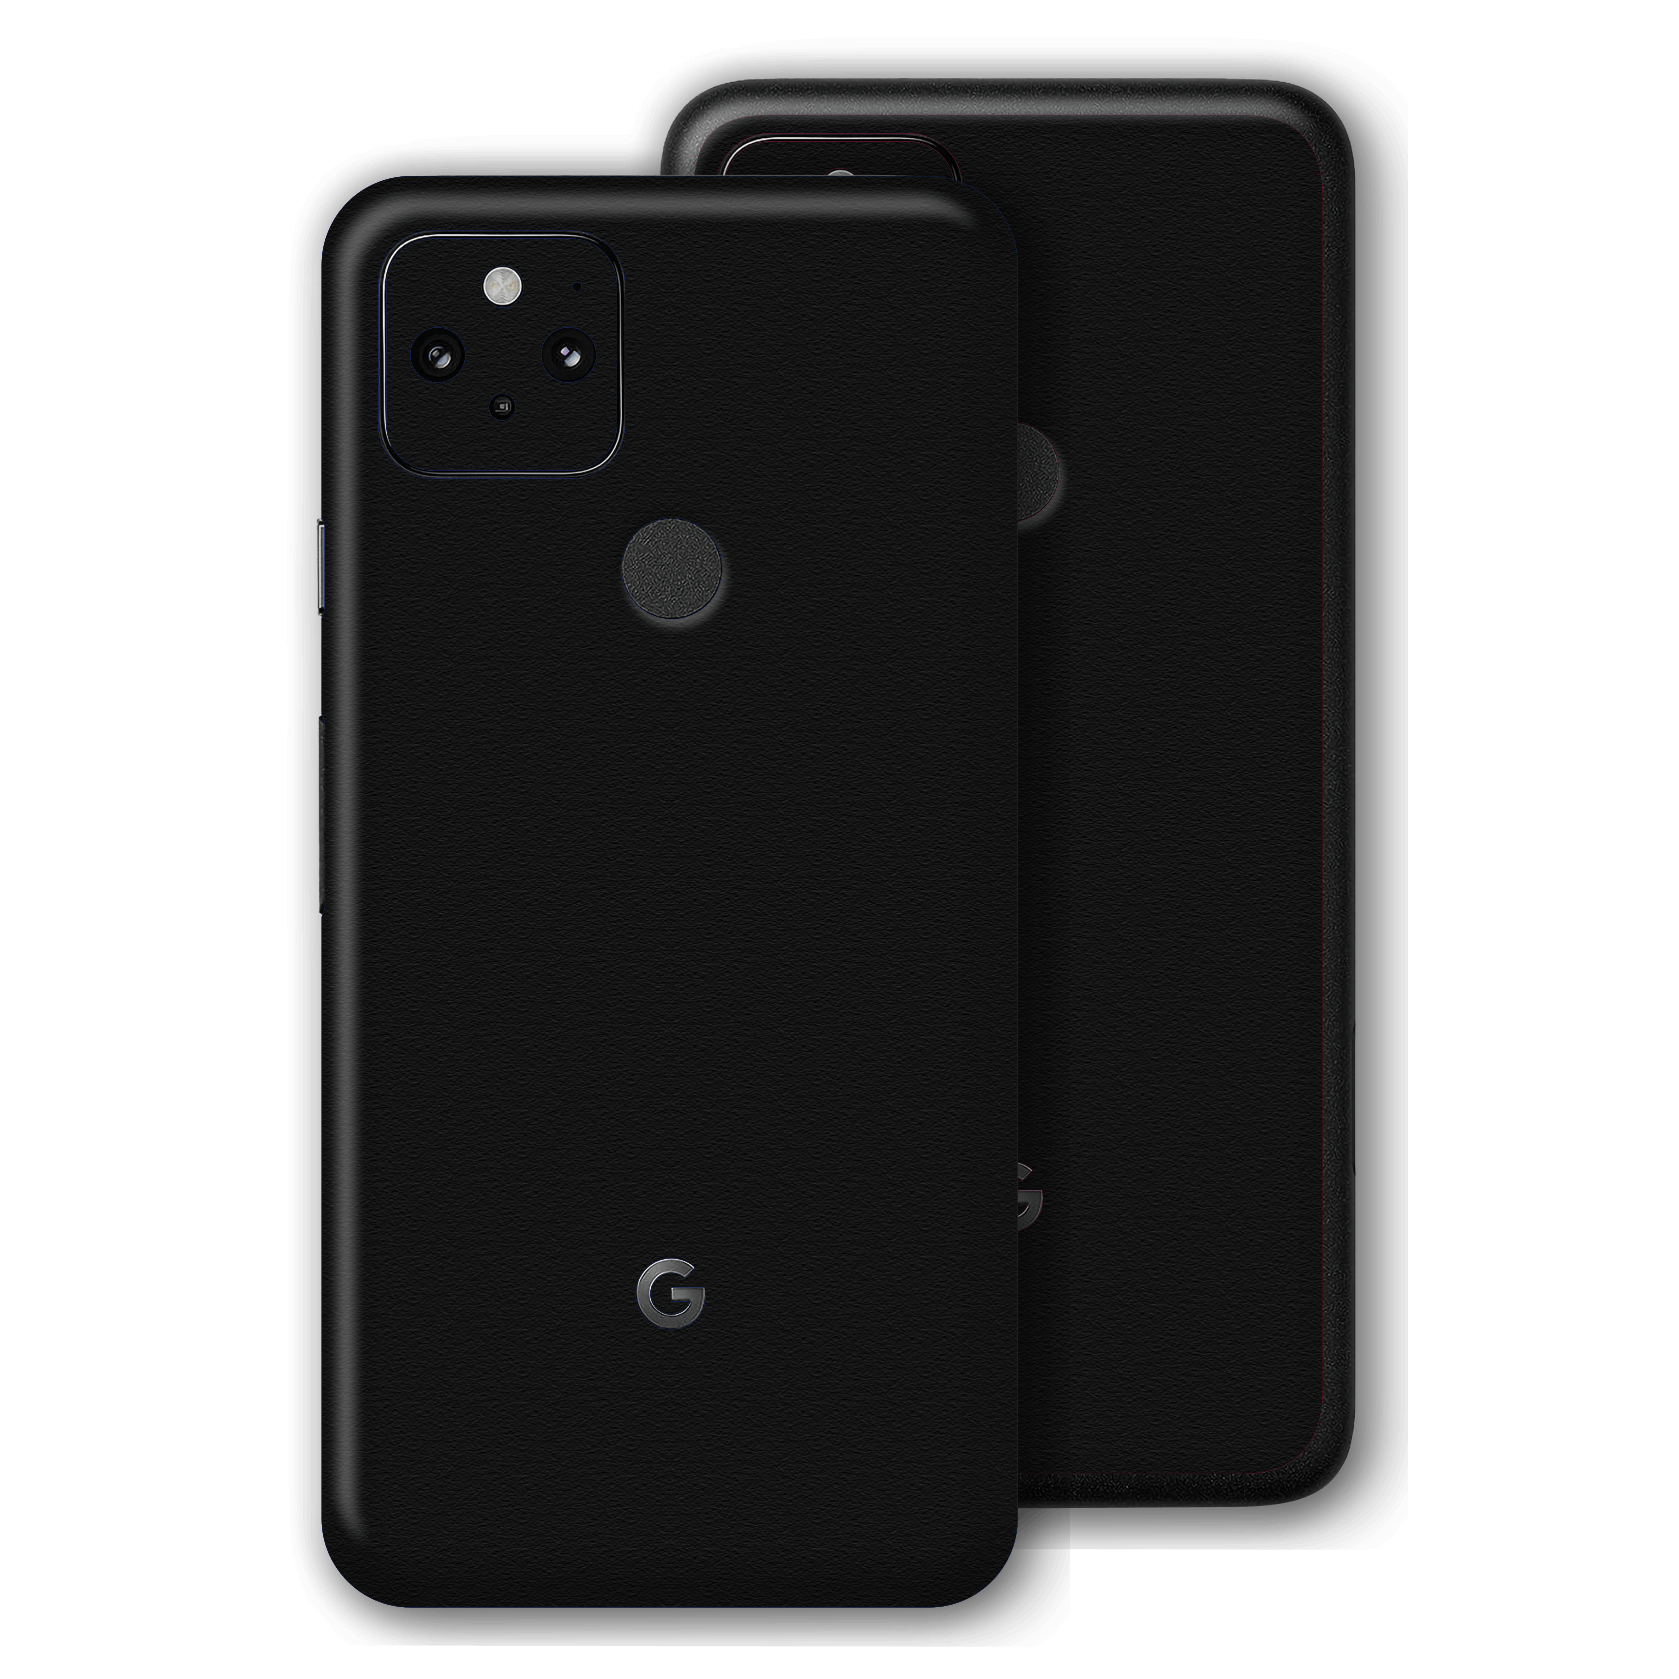 Google Pixel 5 Luxuria Raven Black 3D Textured Skin Wrap Sticker Decal Cover Protector by EasySkinz